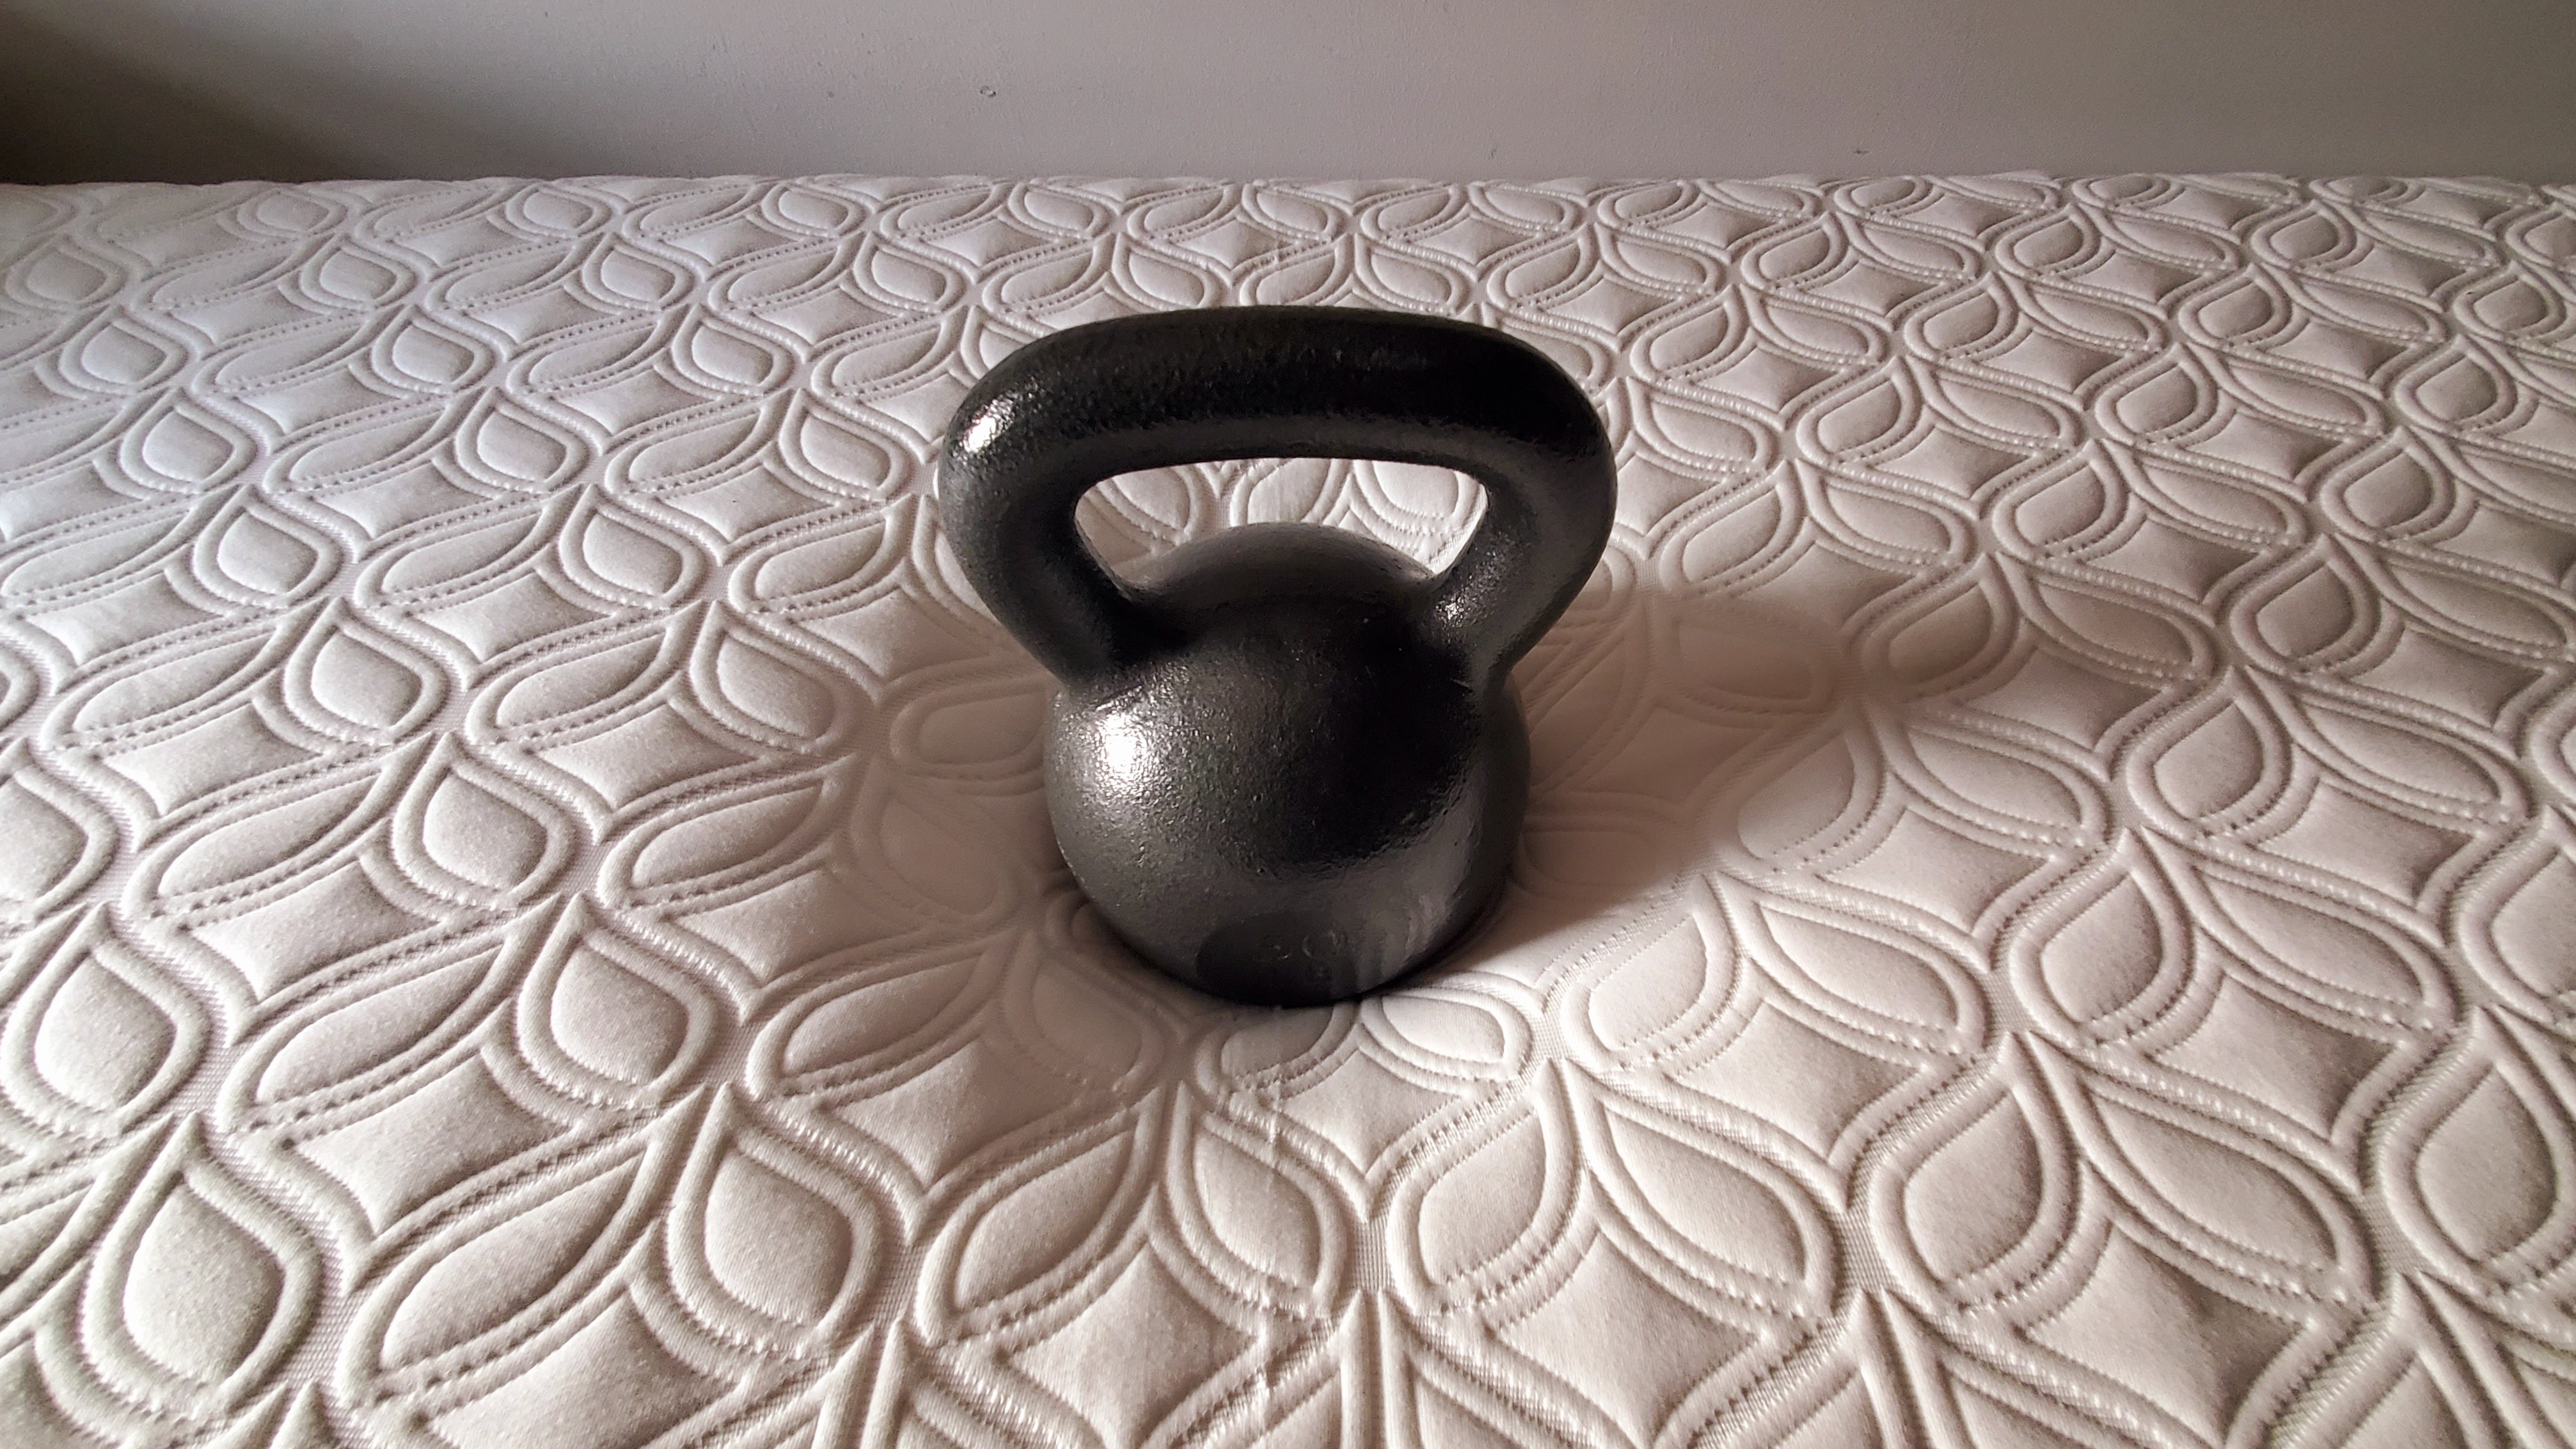 Cocoon by Sealy Chill mattress, testing pressure relief by placing a 50lb kettlebell in the middle